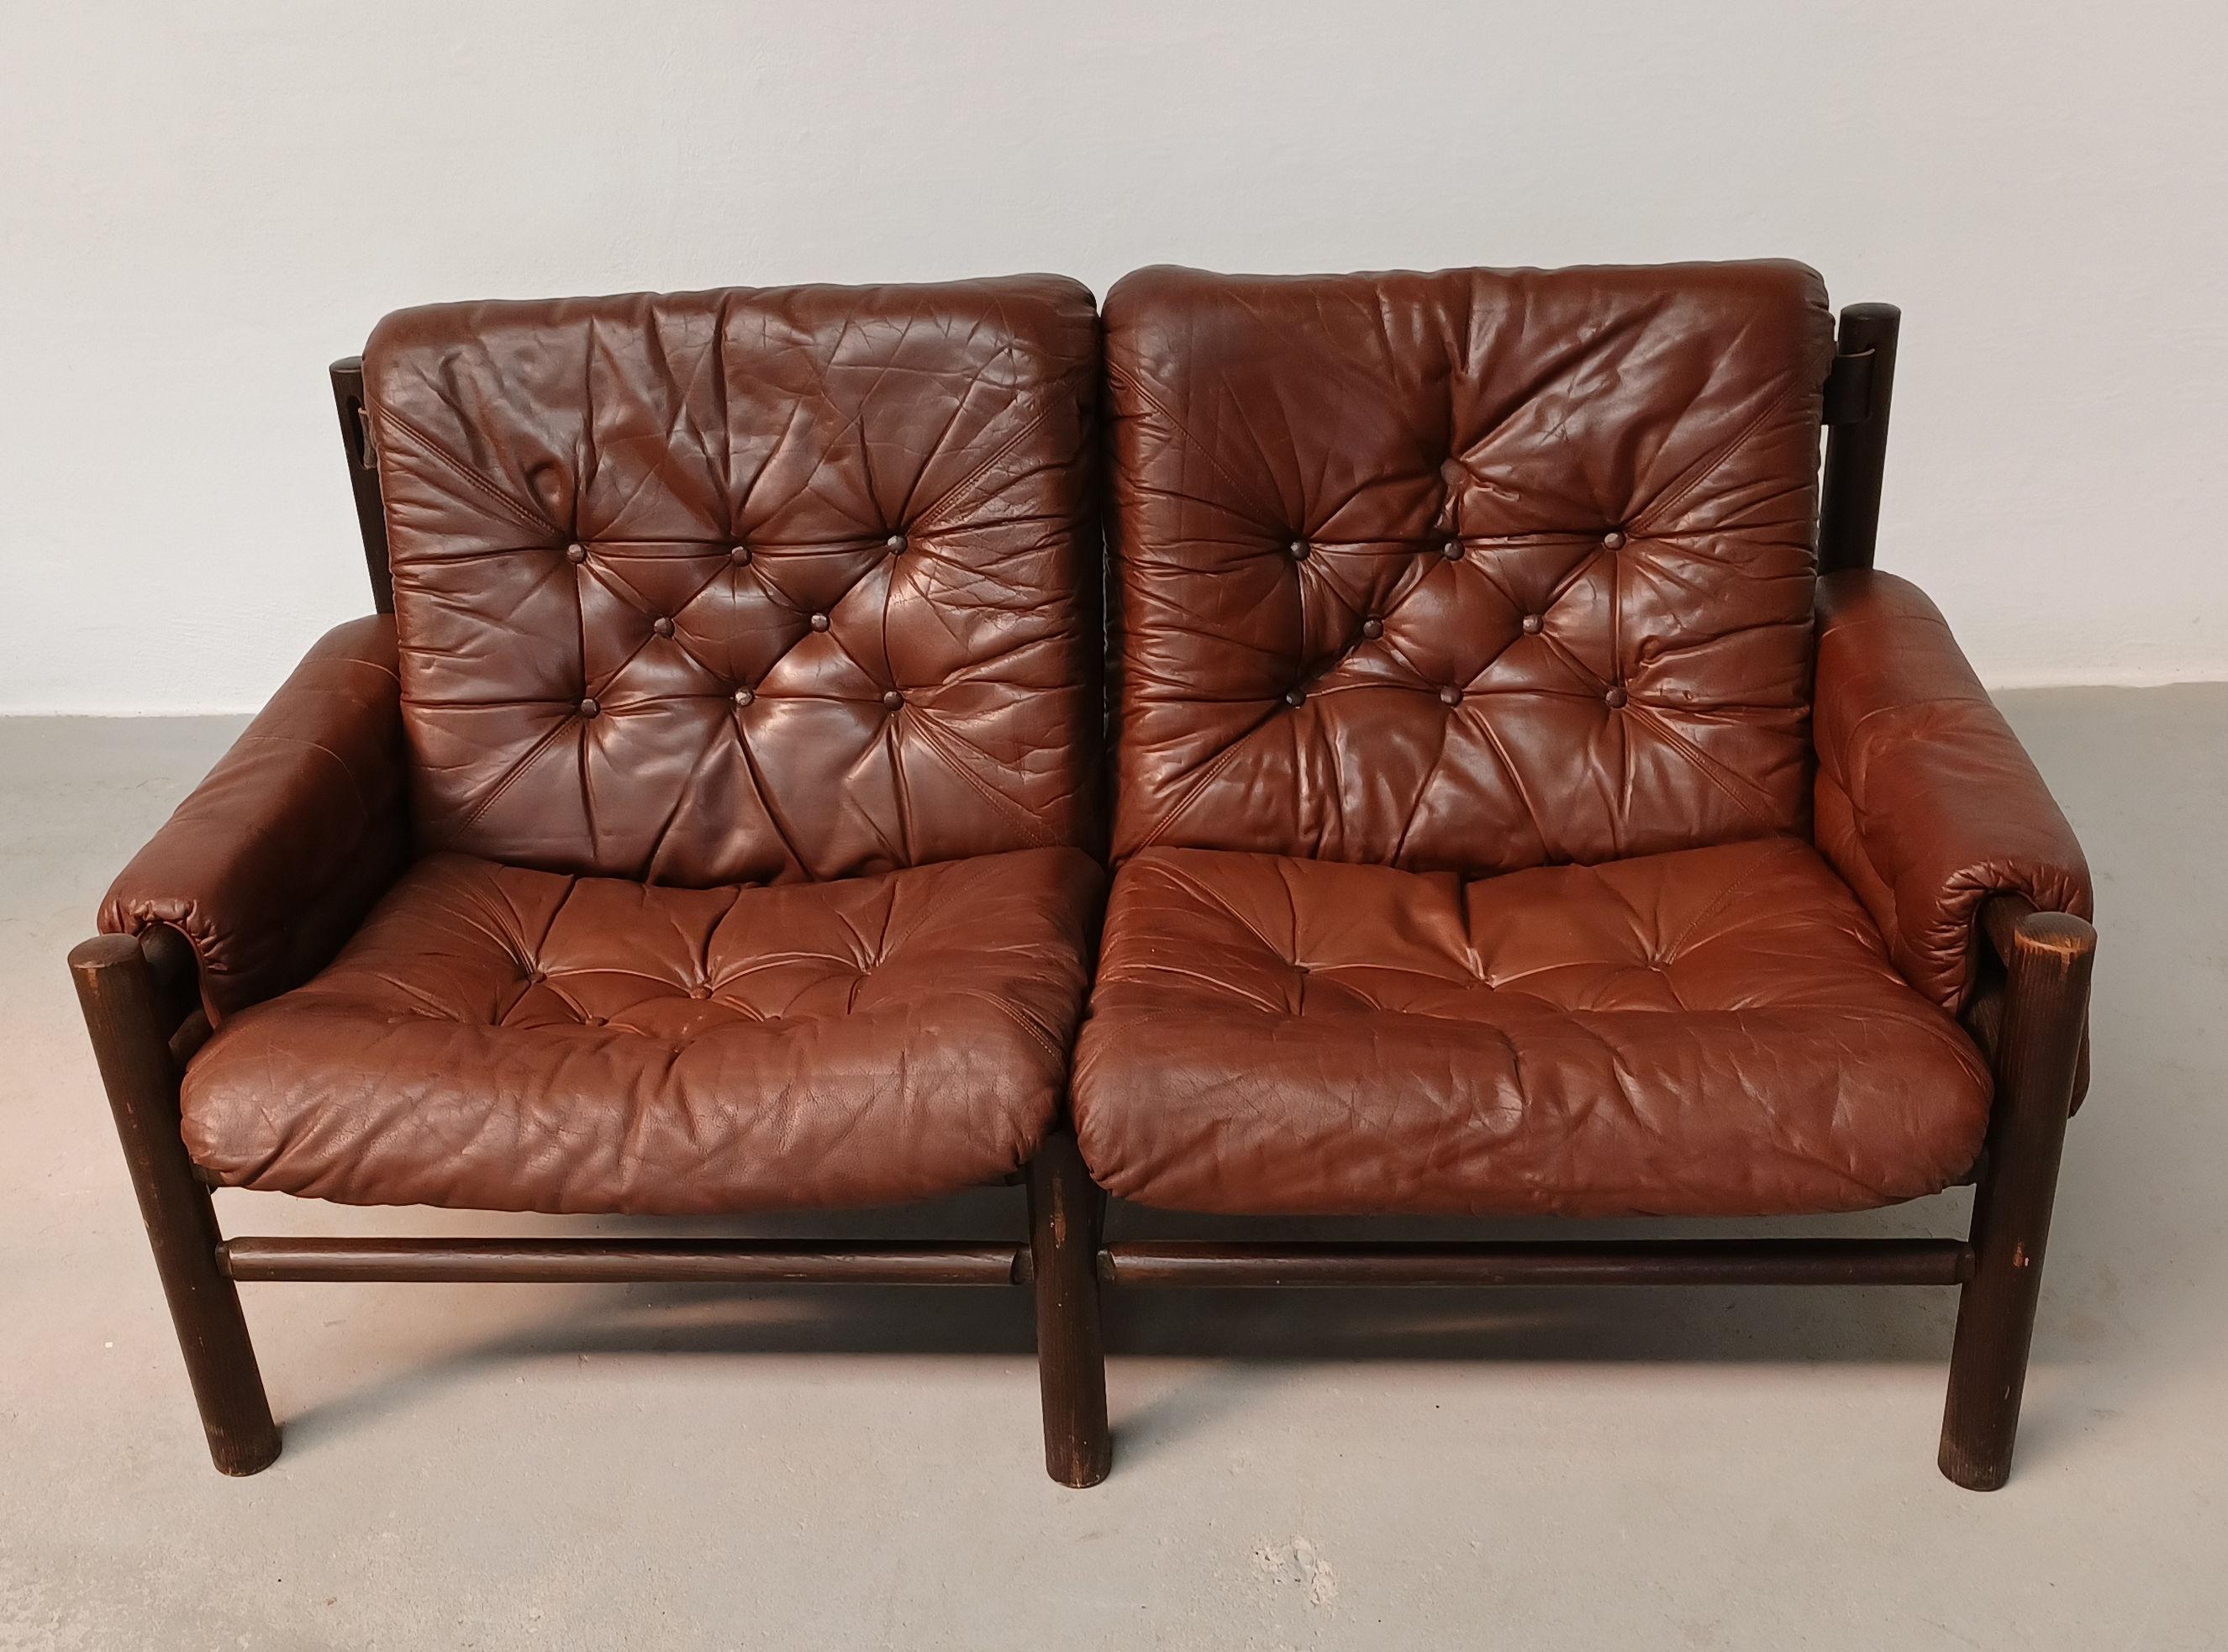 1970's Bruksbo Safari Sofa in Wood and Leather

Midcentury low sling leather safari 2-seat sofa by the Norwegian designer Bruksbo.

The safari sofa consist of a wooden frame with a unique birch spindle back held by leathered straps and soft brown /